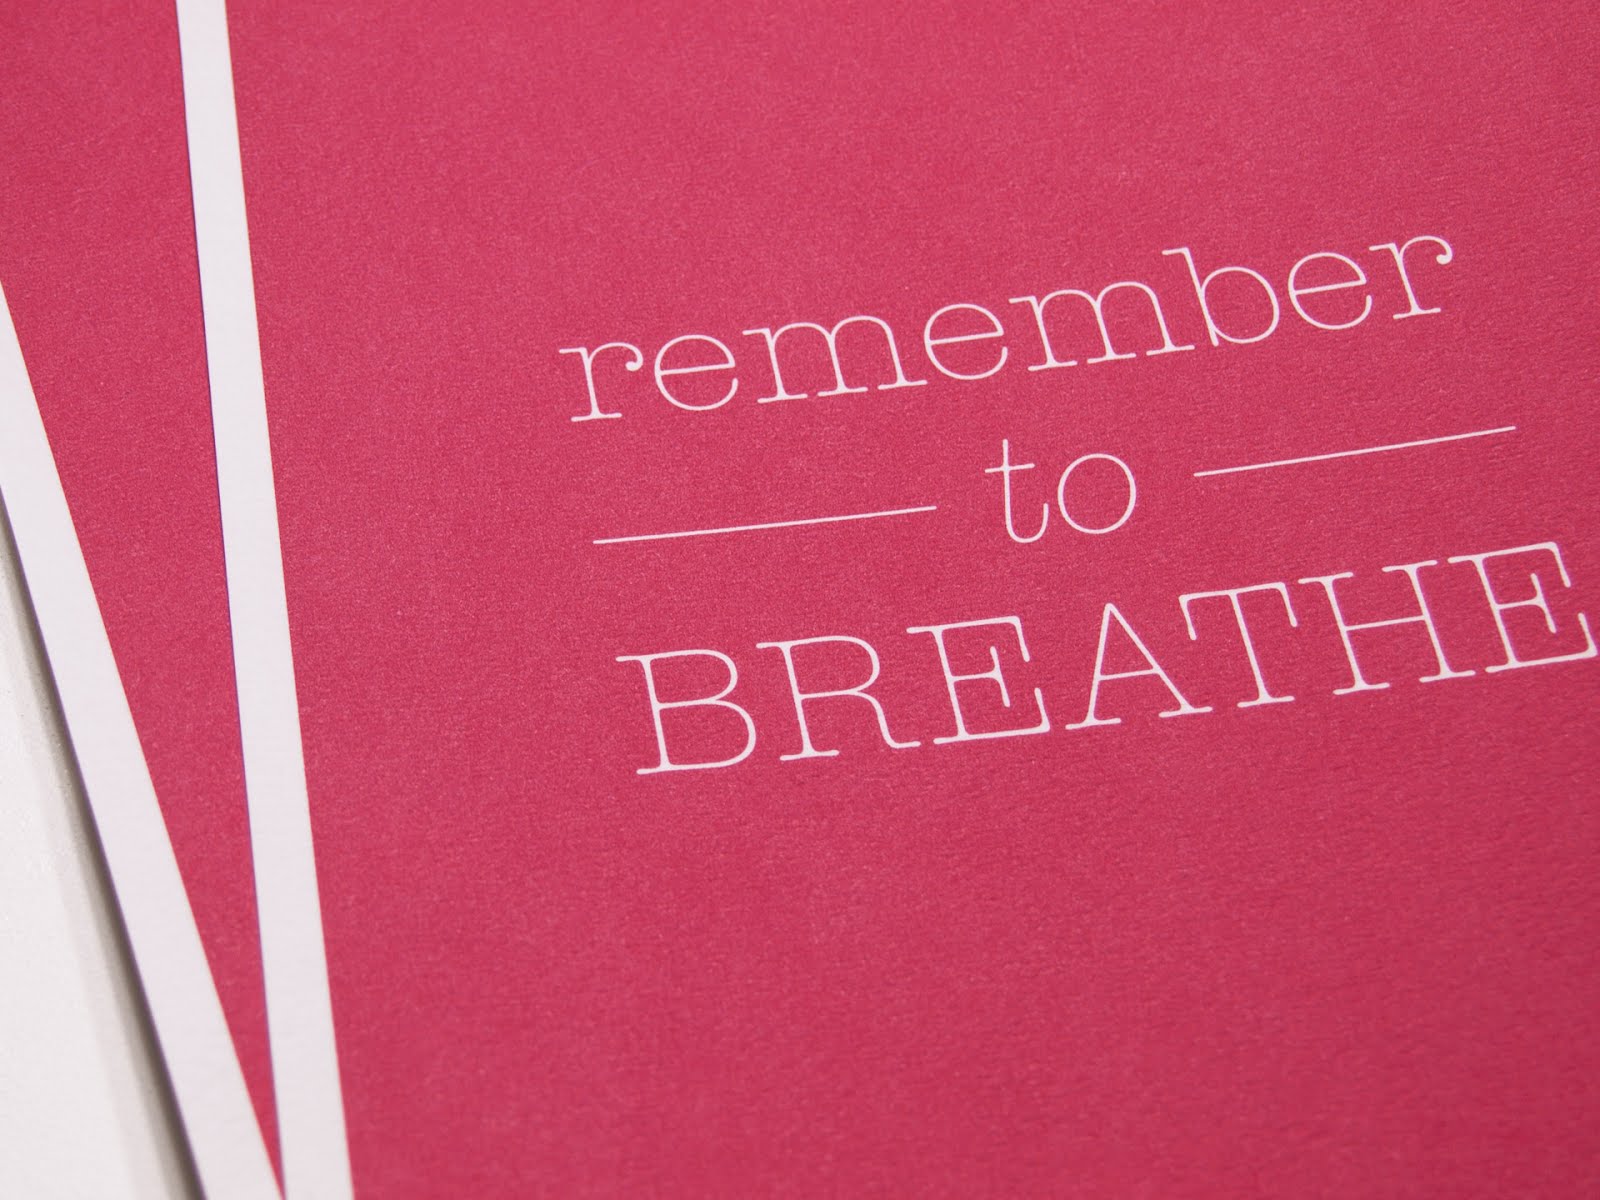 Remember to breathe